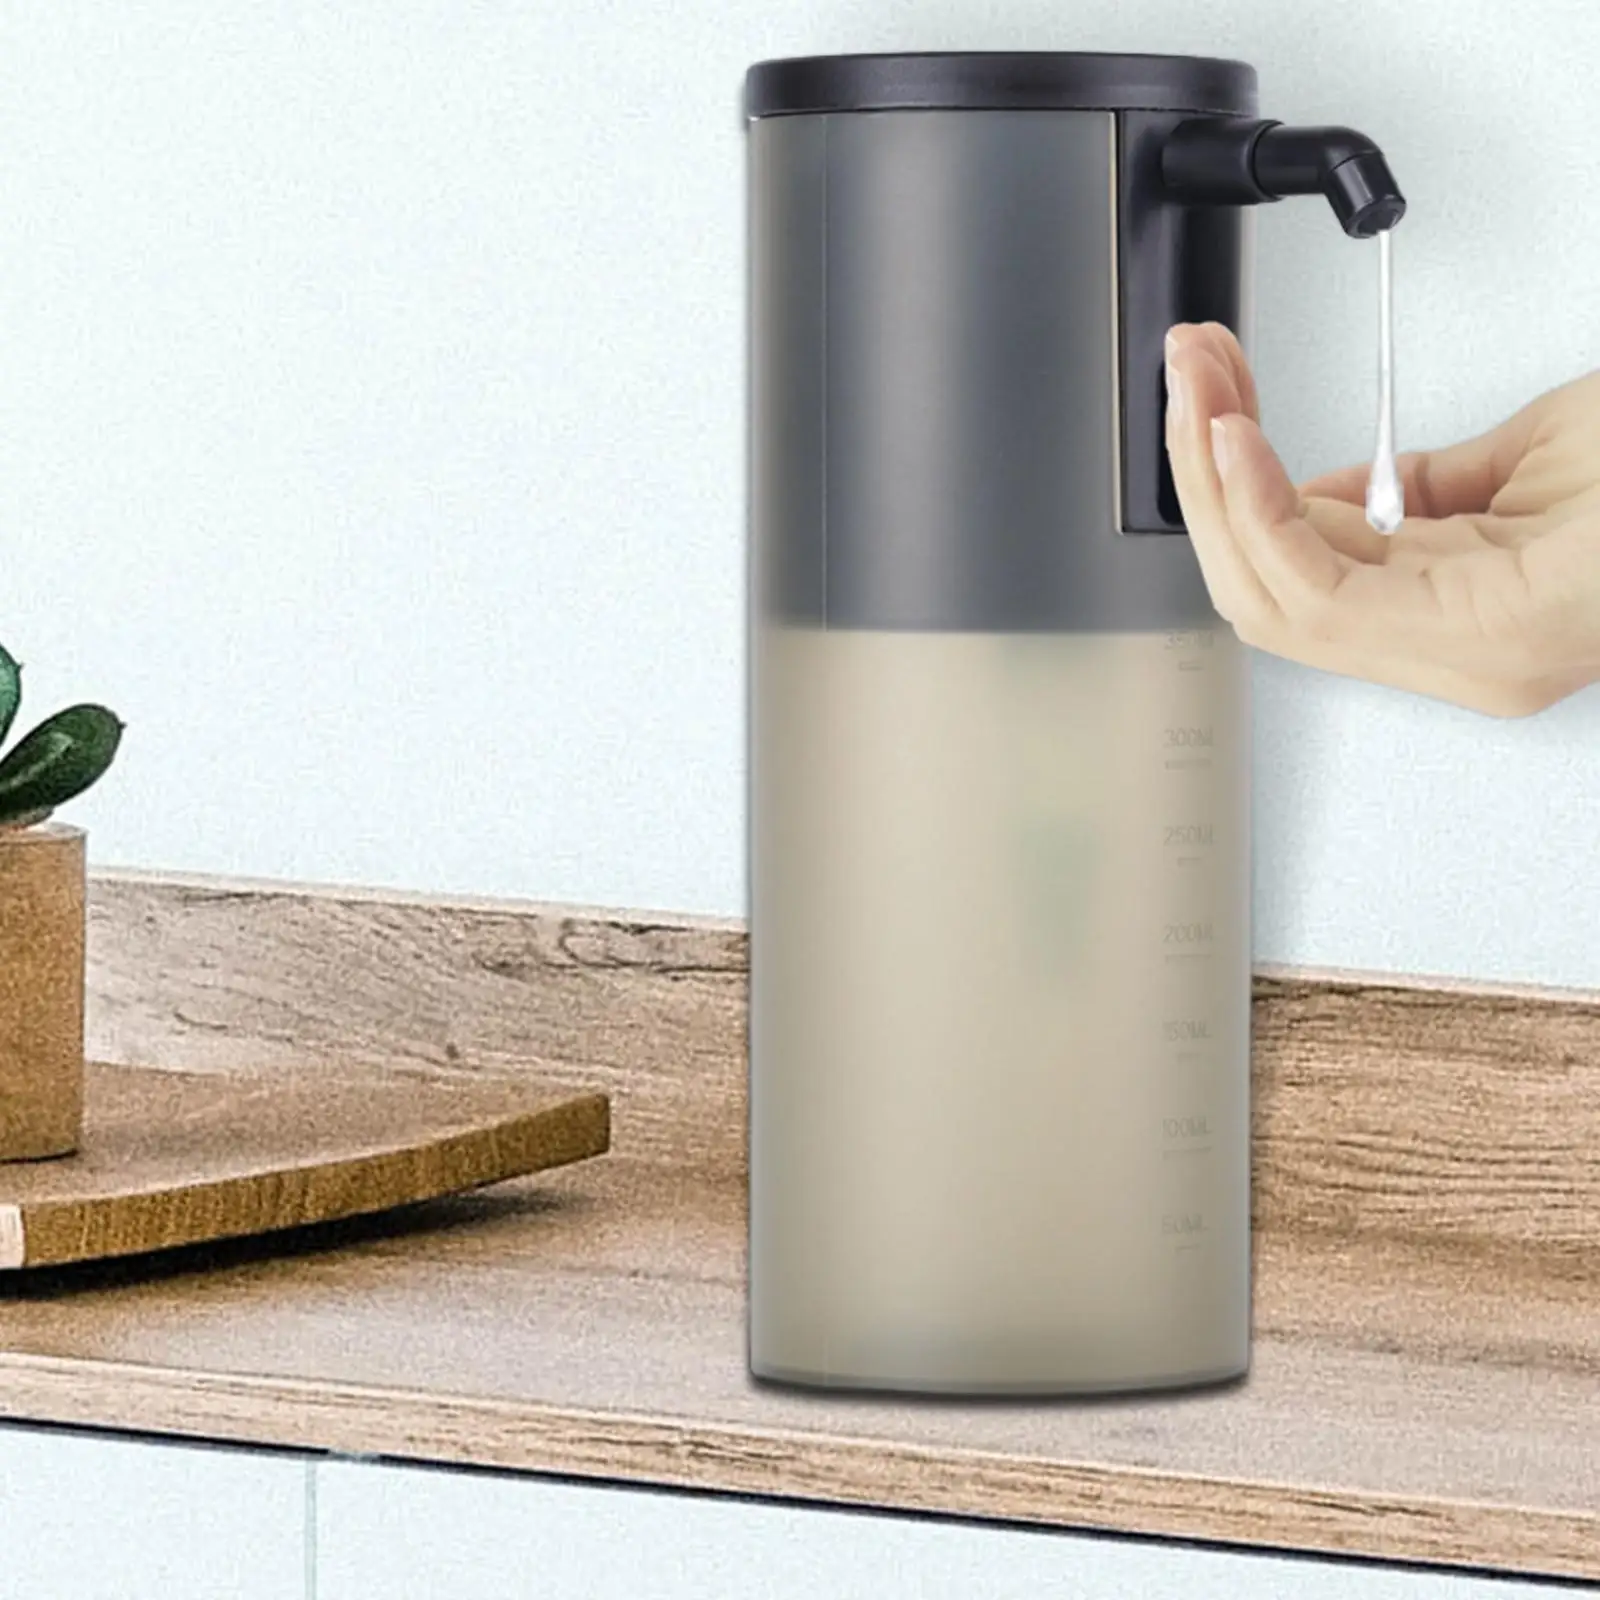 Touchless Soap Dispensers Waterproof Auto Liquid Soap Dispenser Dish Soap Dispenser for Kitchen Offices Commercial home